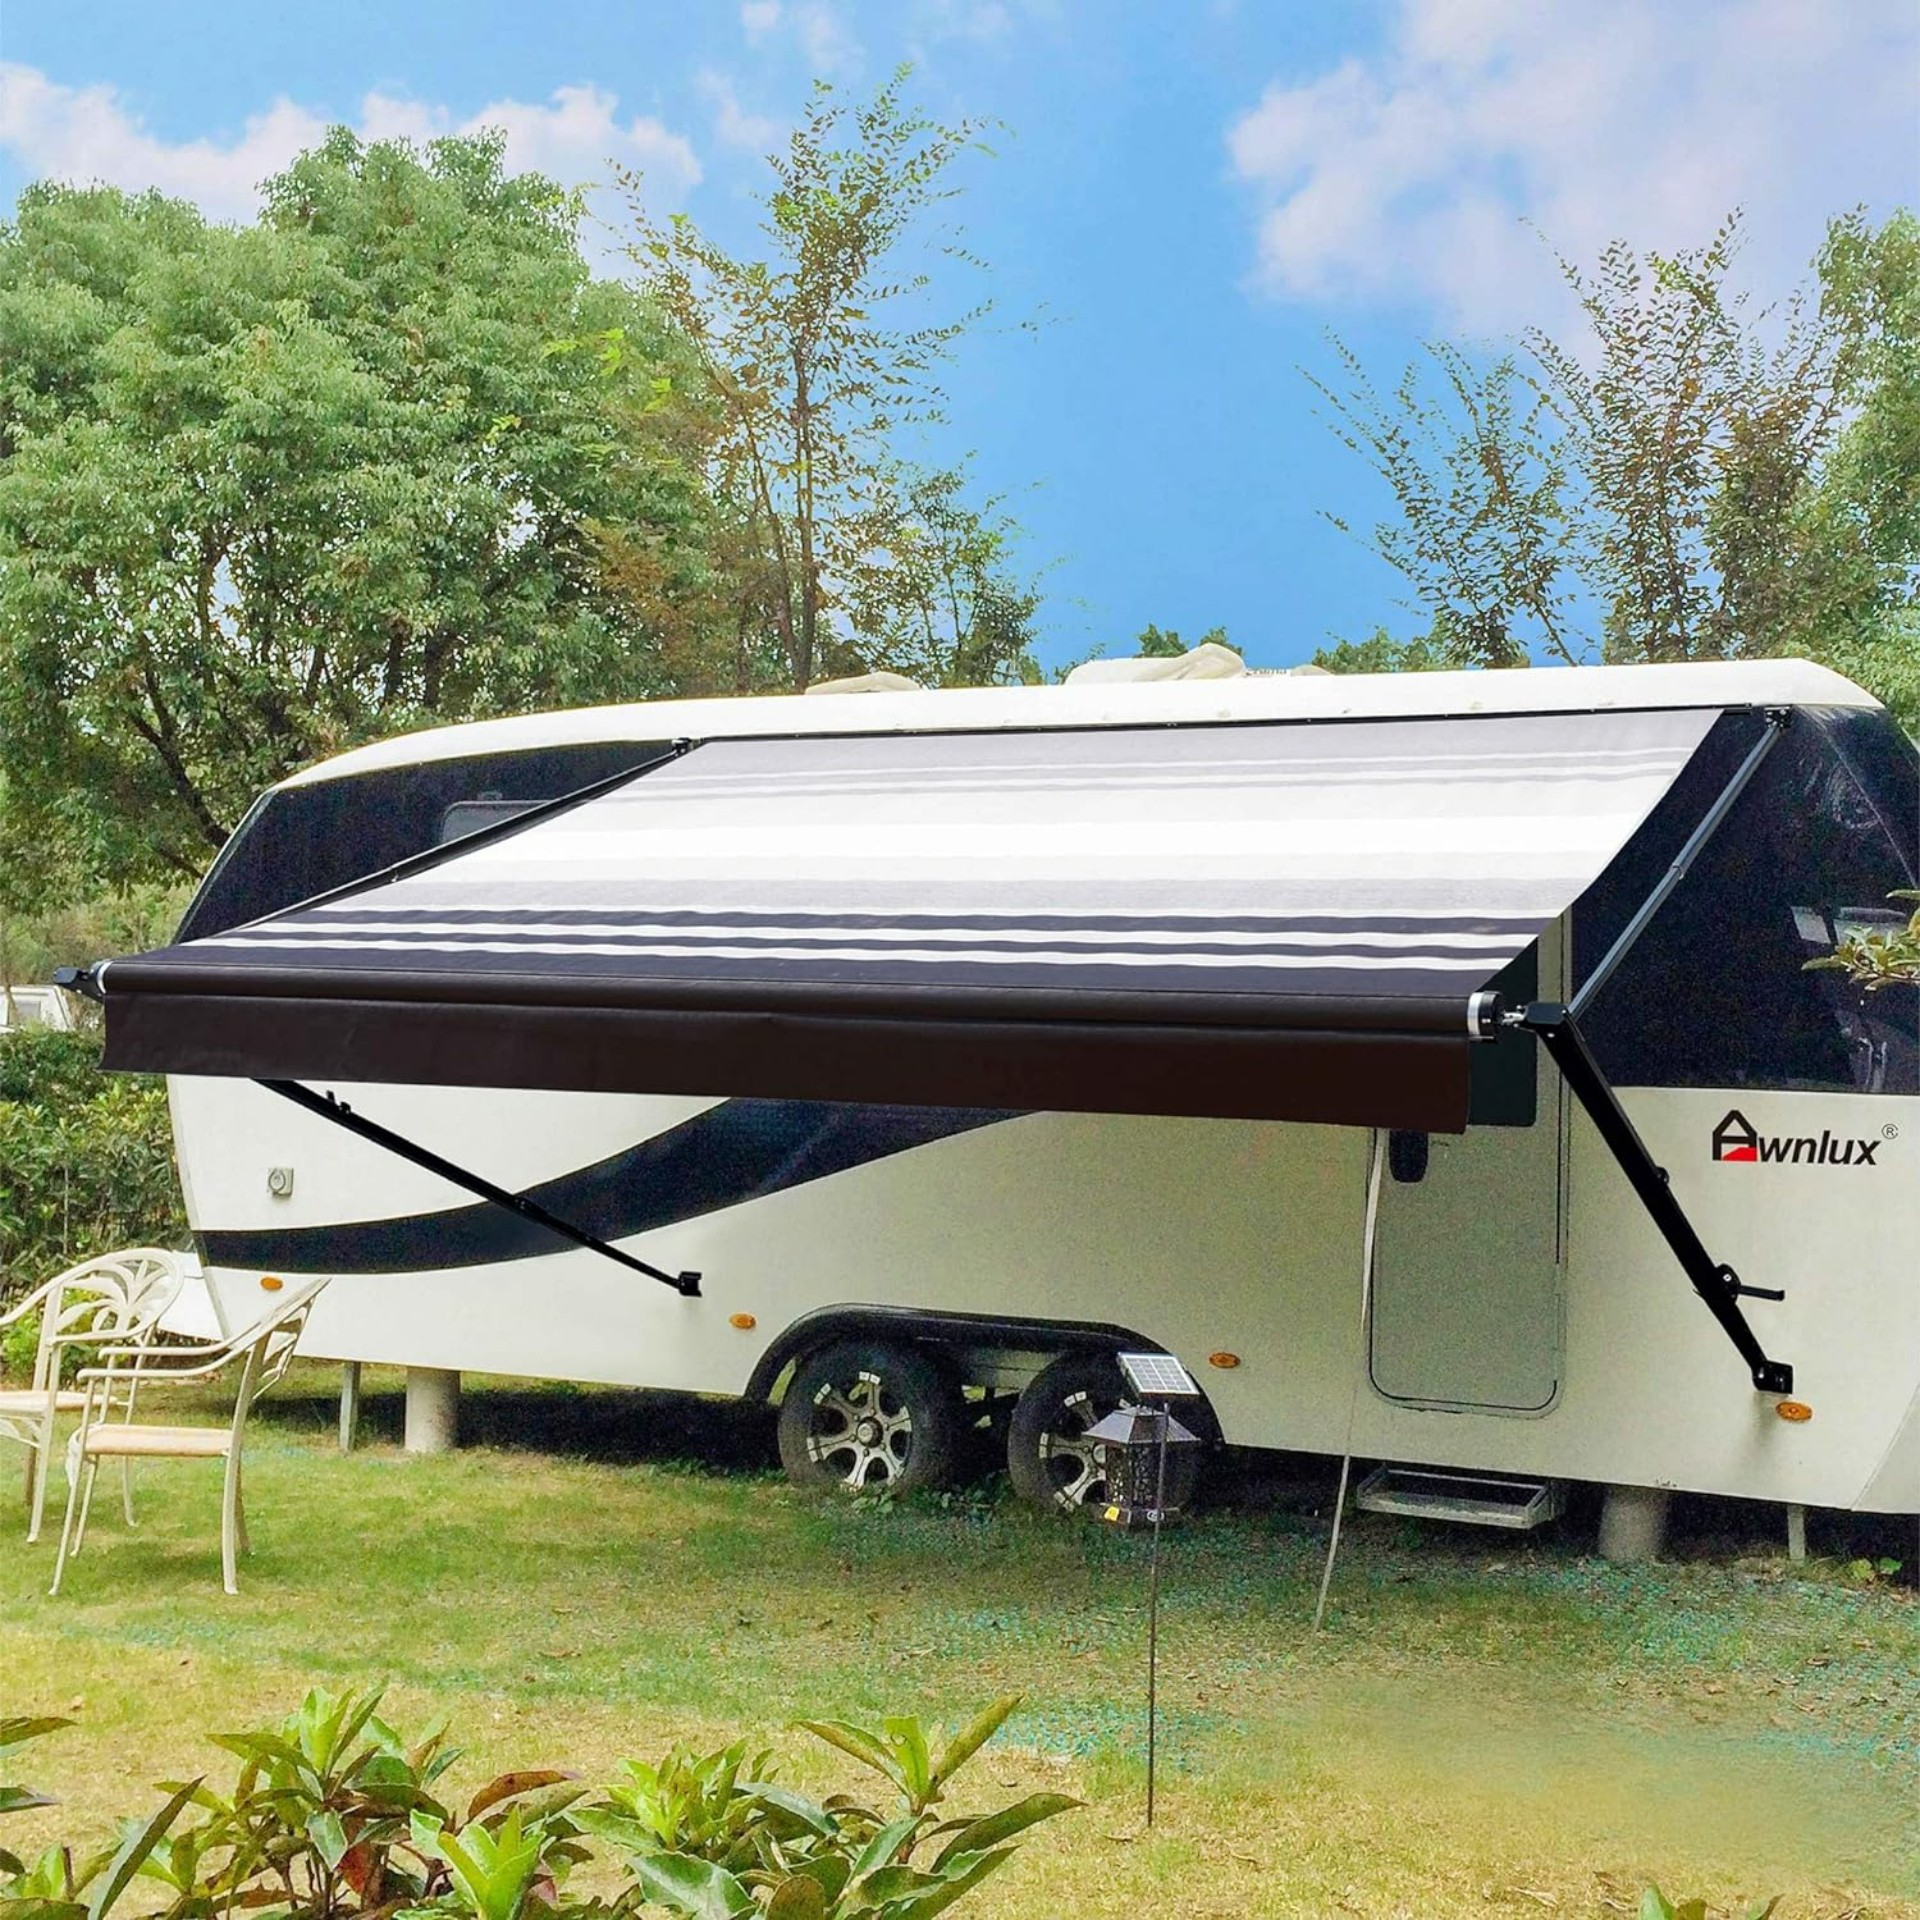 10 Must-Have RV Accessories & Upgrades for Your Rig